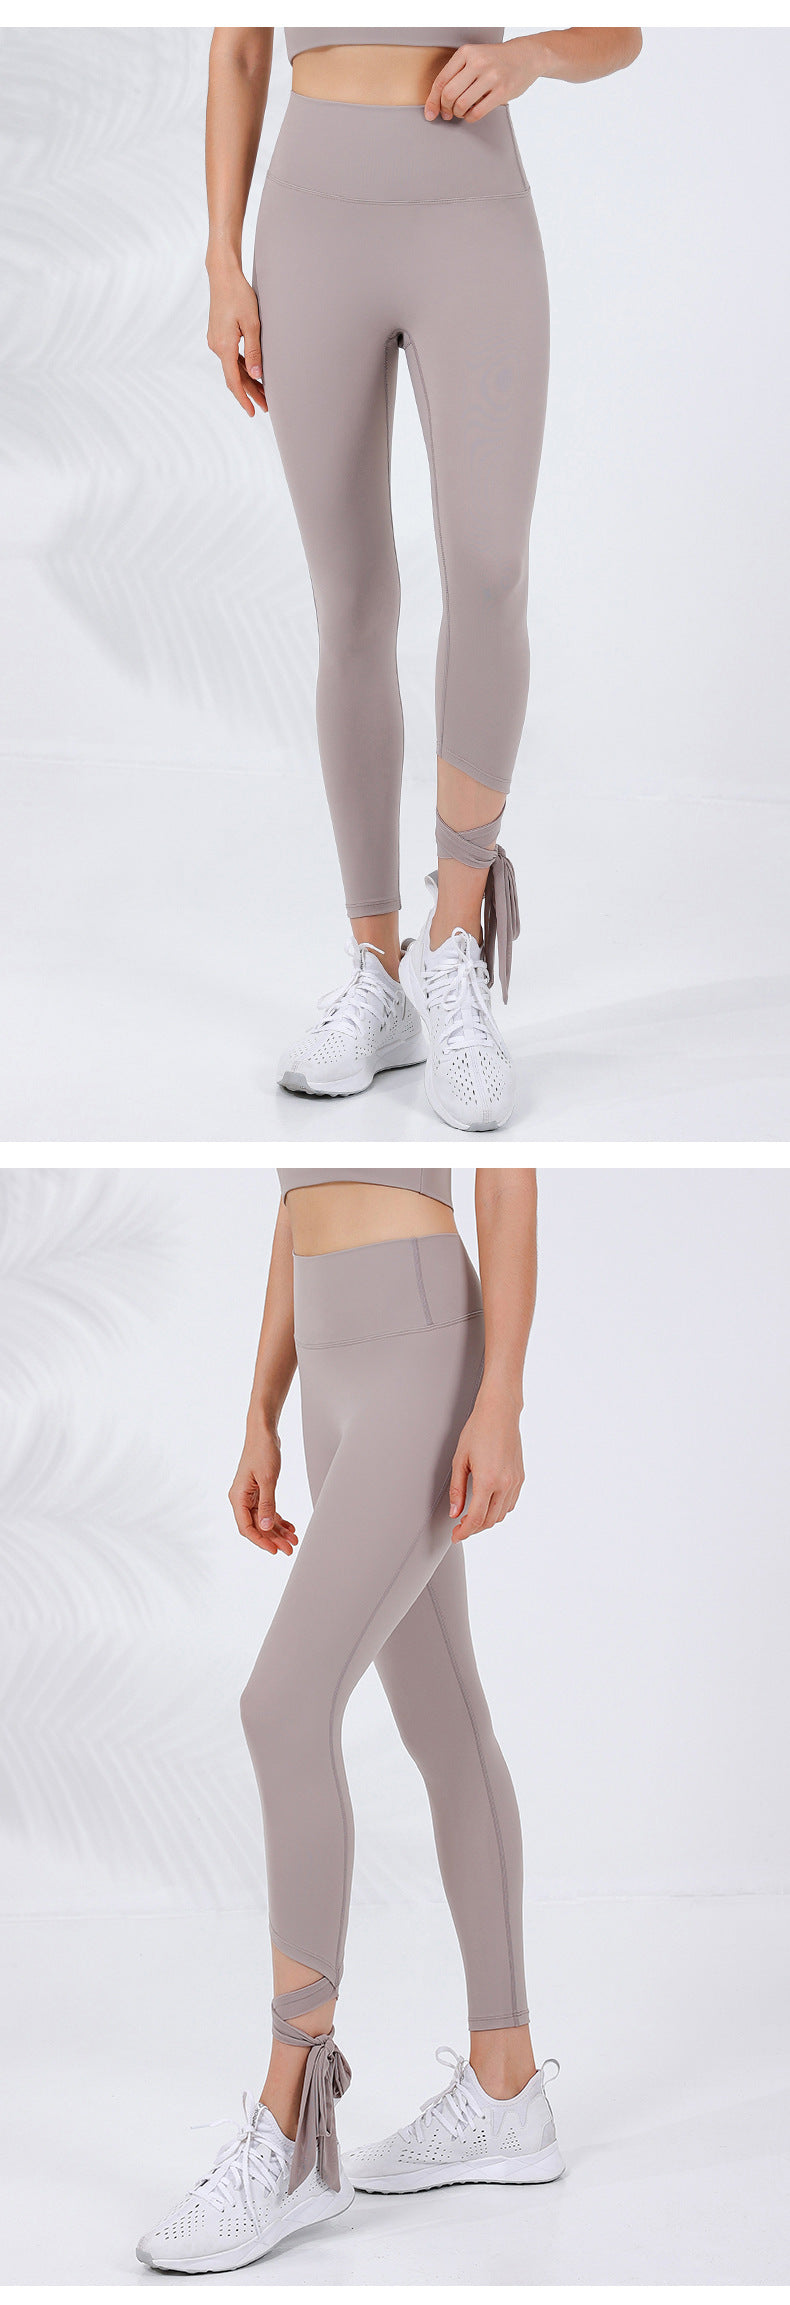 2023.09 New innovative calf straps, new style sports pants for women, high waist, tummy control, butt lift, zero embarrassment zone fitness yoga pants